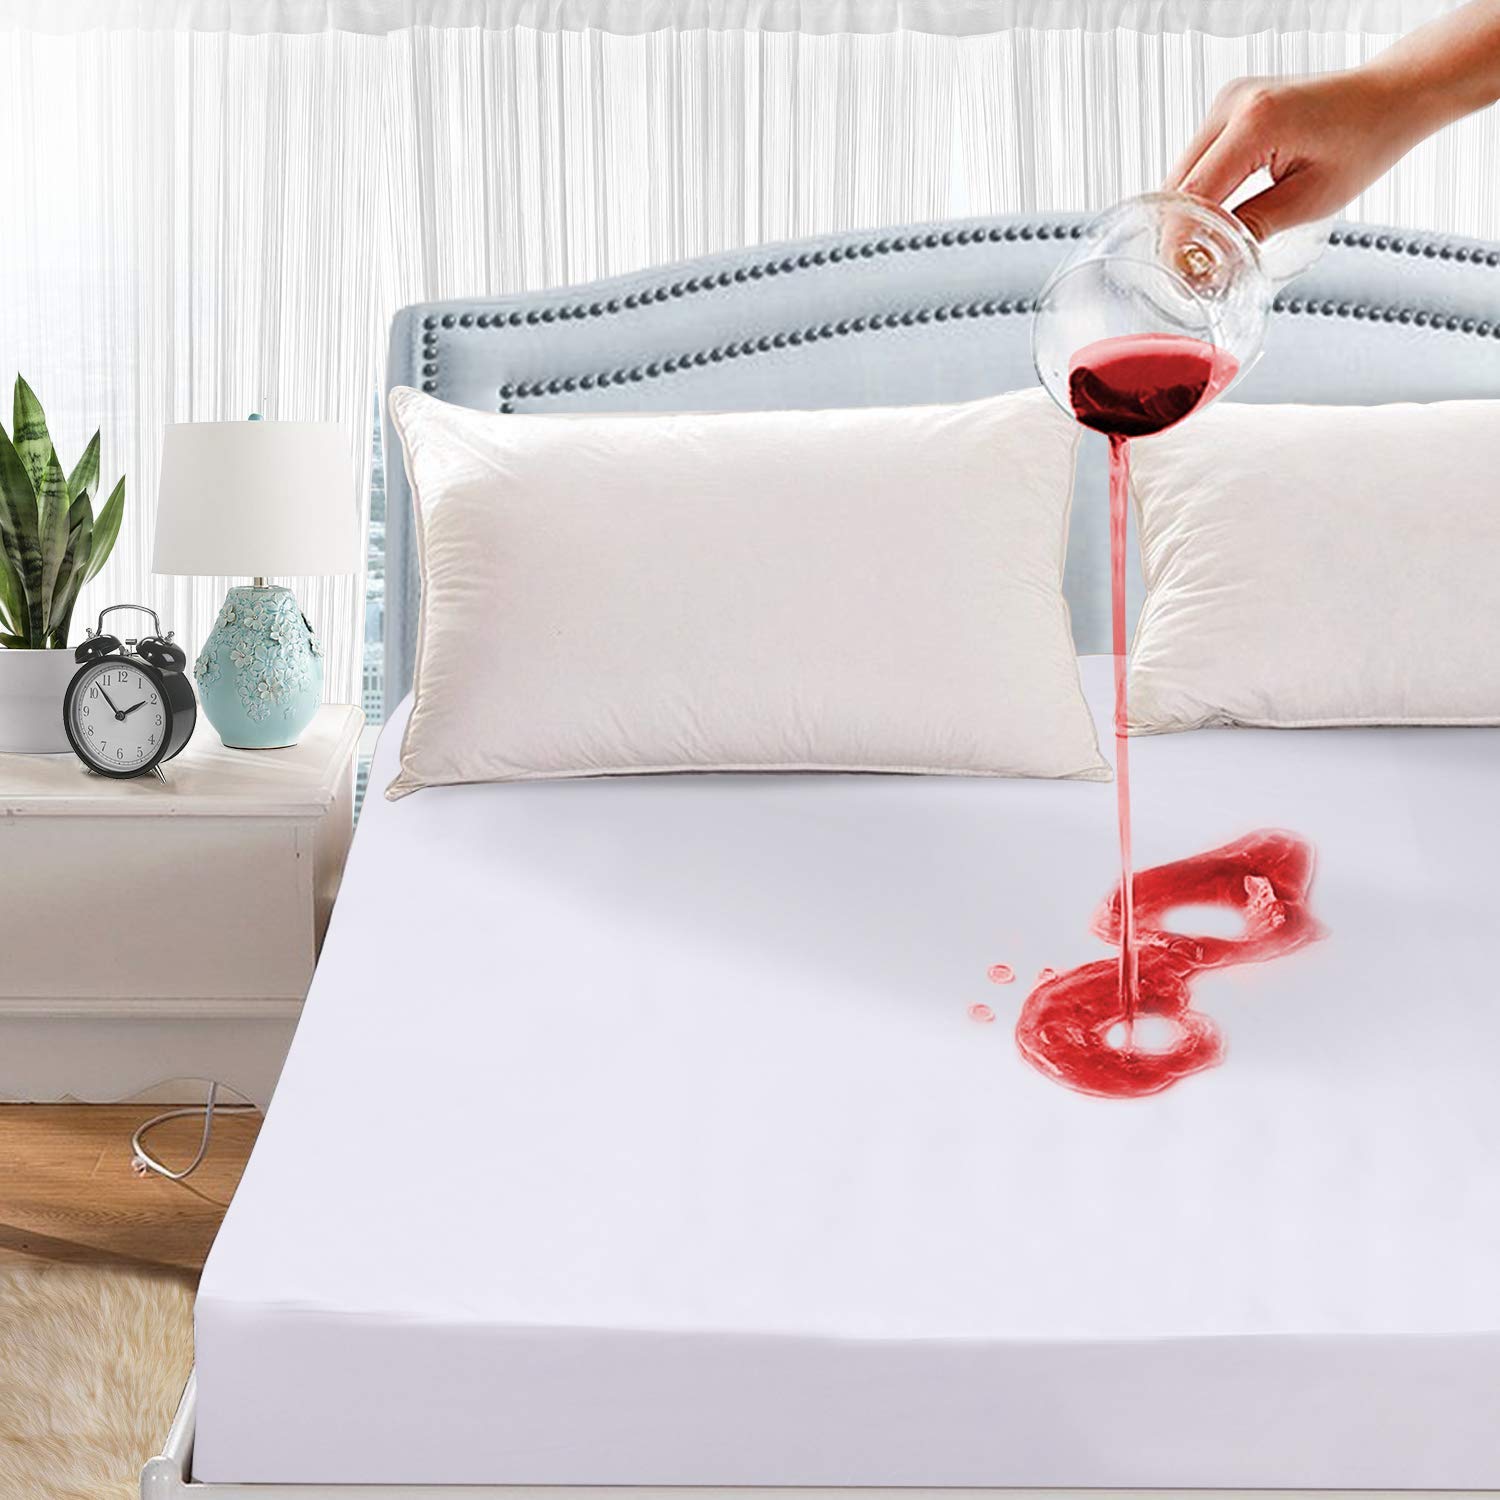 Poly Cotton Jersey Waterproof Mattress Protector In White Color With Elastic Fitting